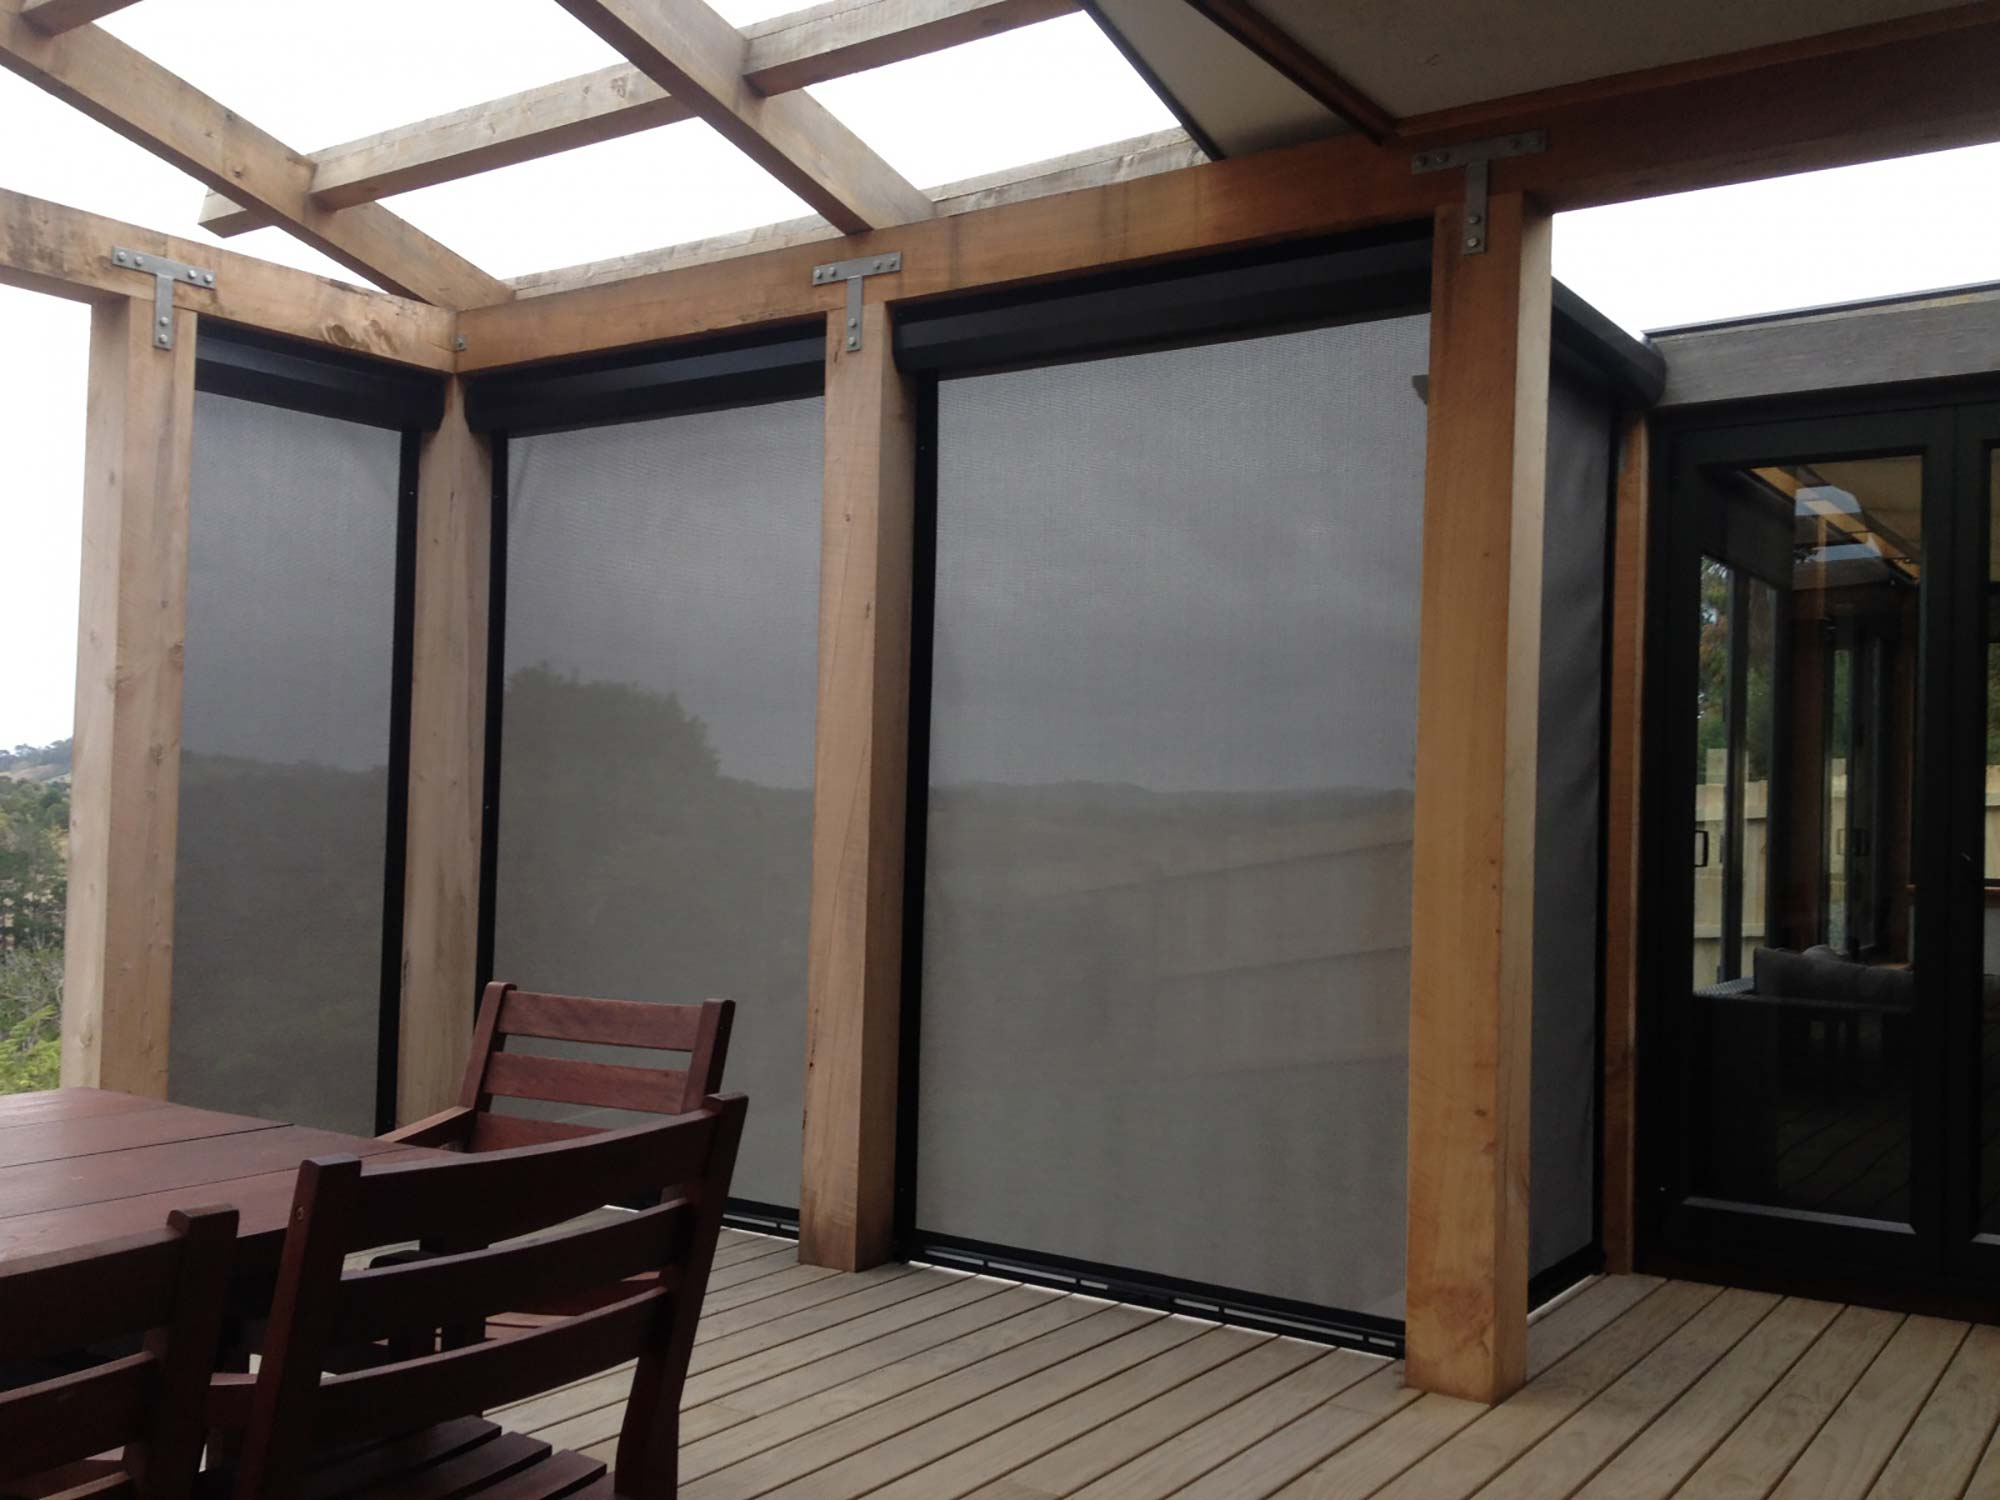 Bespoke Outdoor Blinds Auckland Dynamic Outdoor Solutions intended for size 2000 X 1500